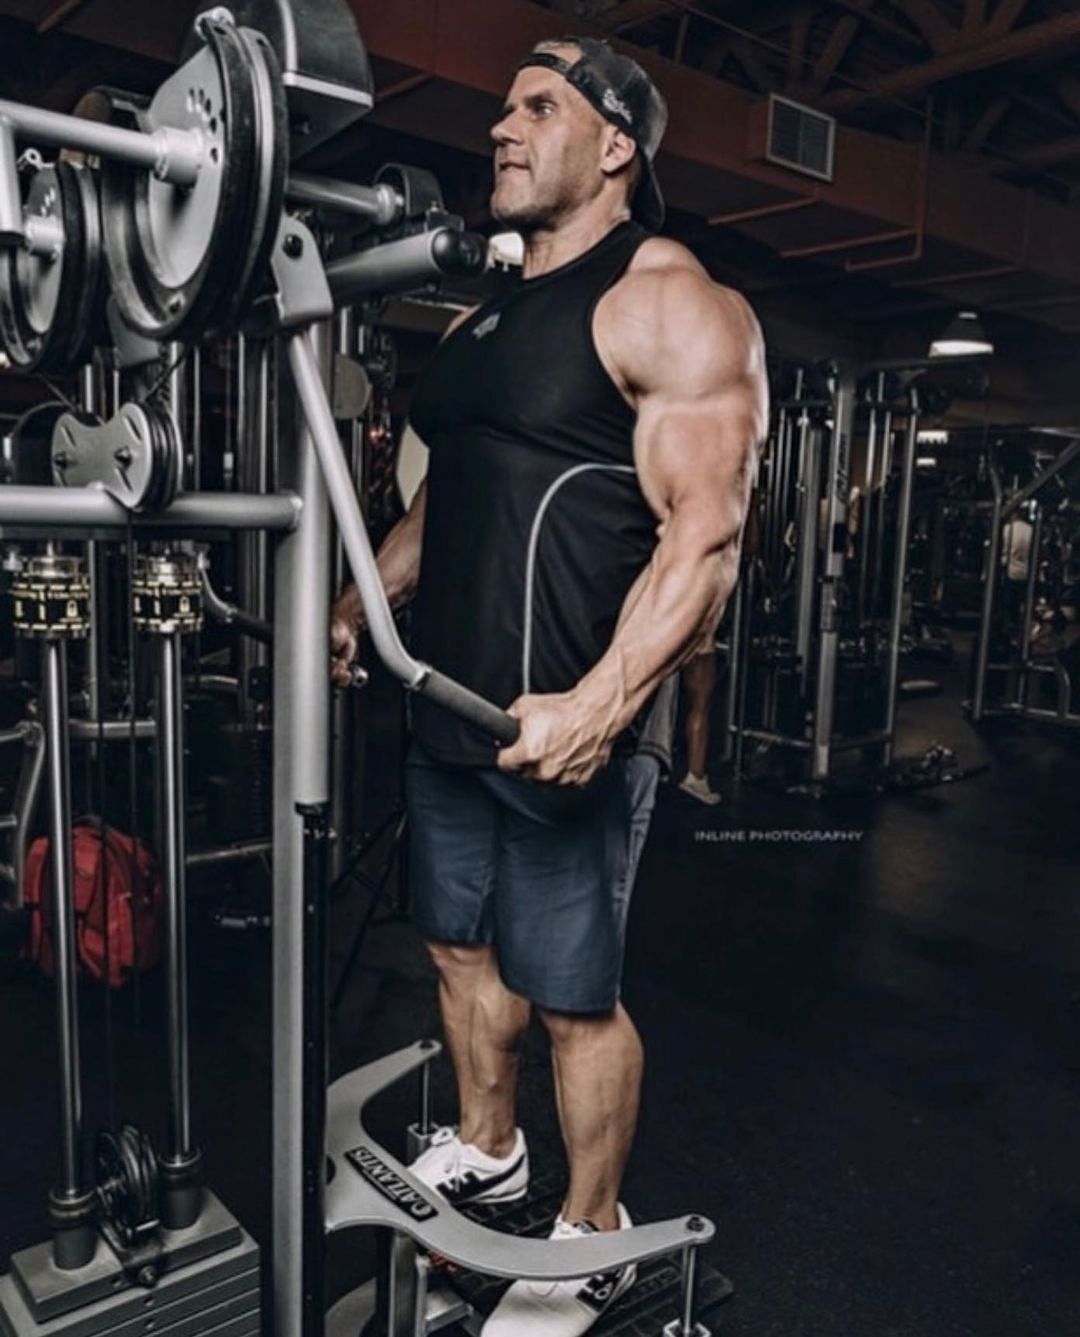 Cutler emphasizes the significance of fasted cardio (Image via Instagram/jaycutler)